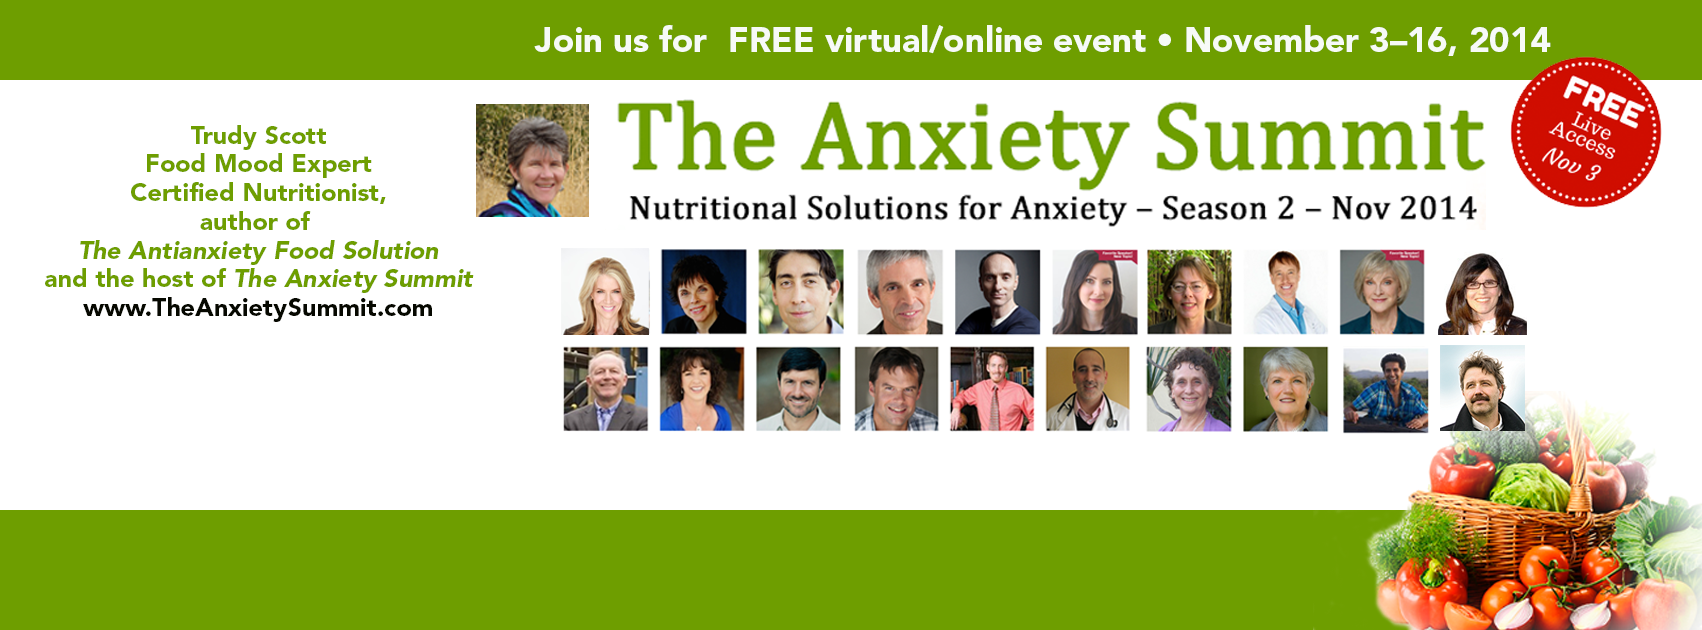 FREE Online Event - The Anxiety Summit - Nutritional Solutions for Anxiety